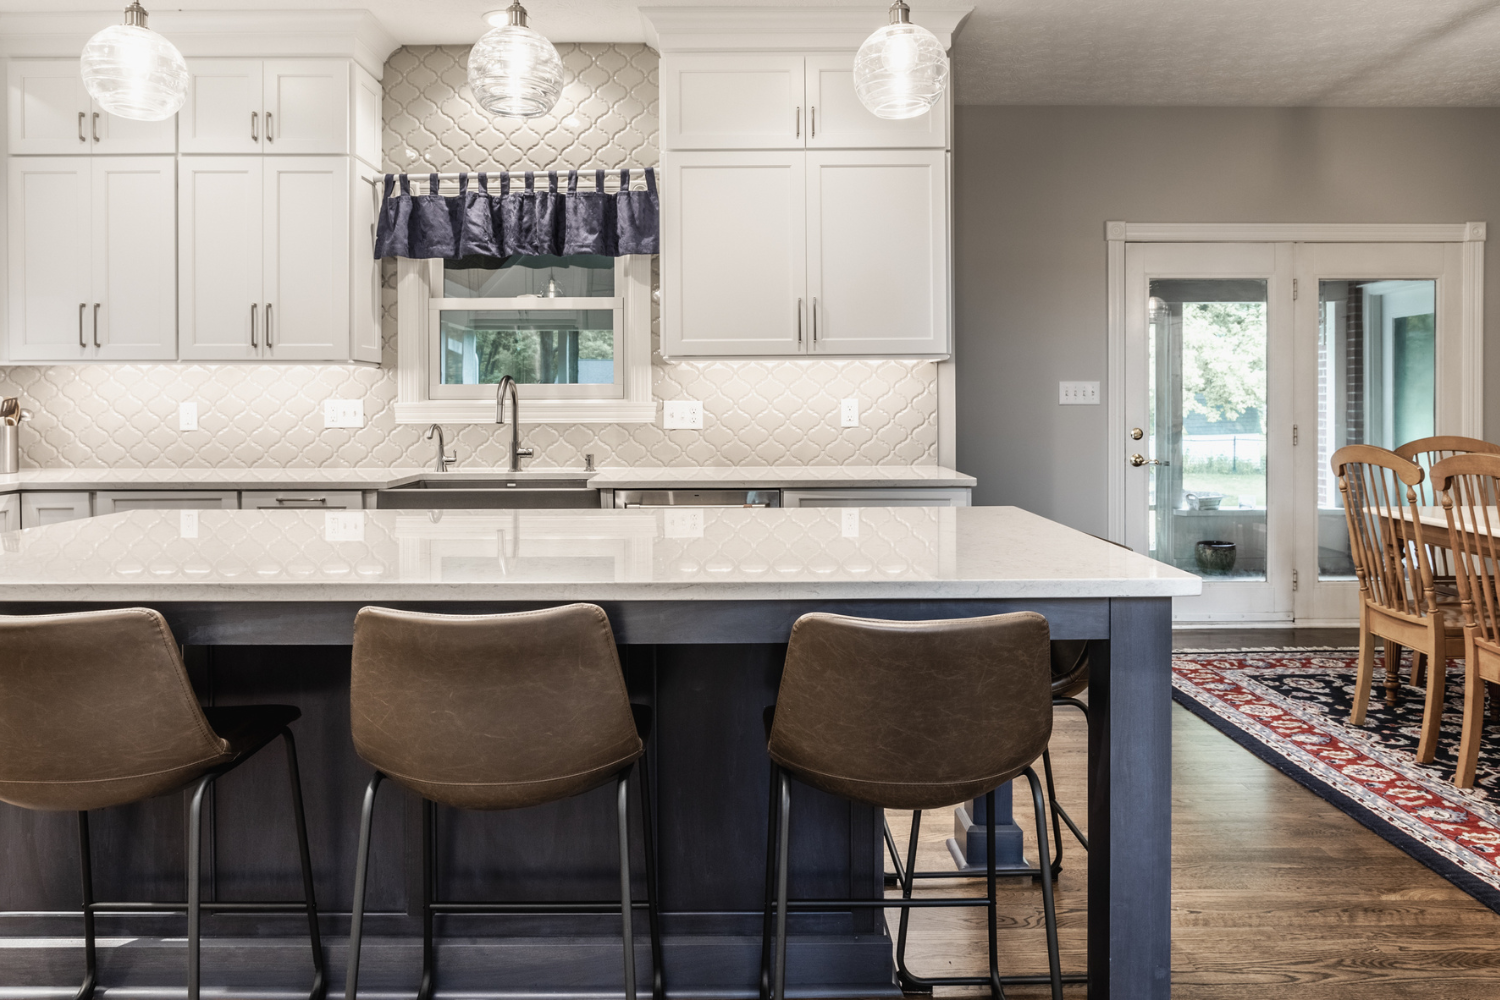 Nicholas Design Build | A kitchen with a center island and bar stools.